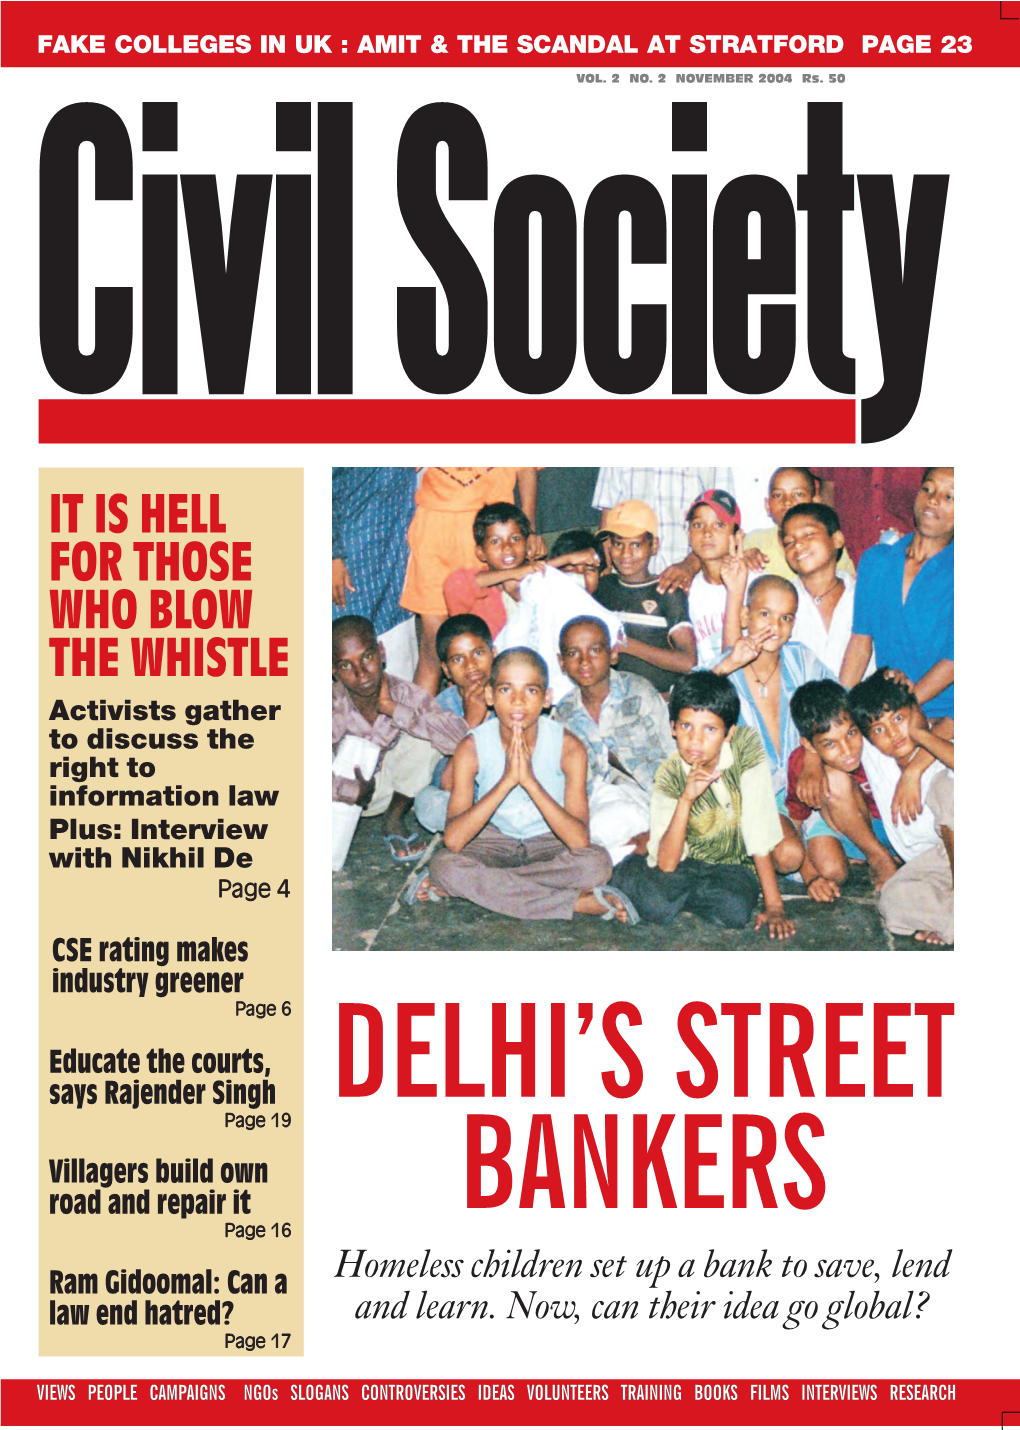 IT IS HELL for THOSE WHO BLOW the WHISTLE Activists Gather to Discuss the Right to Information Law Plus: Interview with Nikhil De Page 4